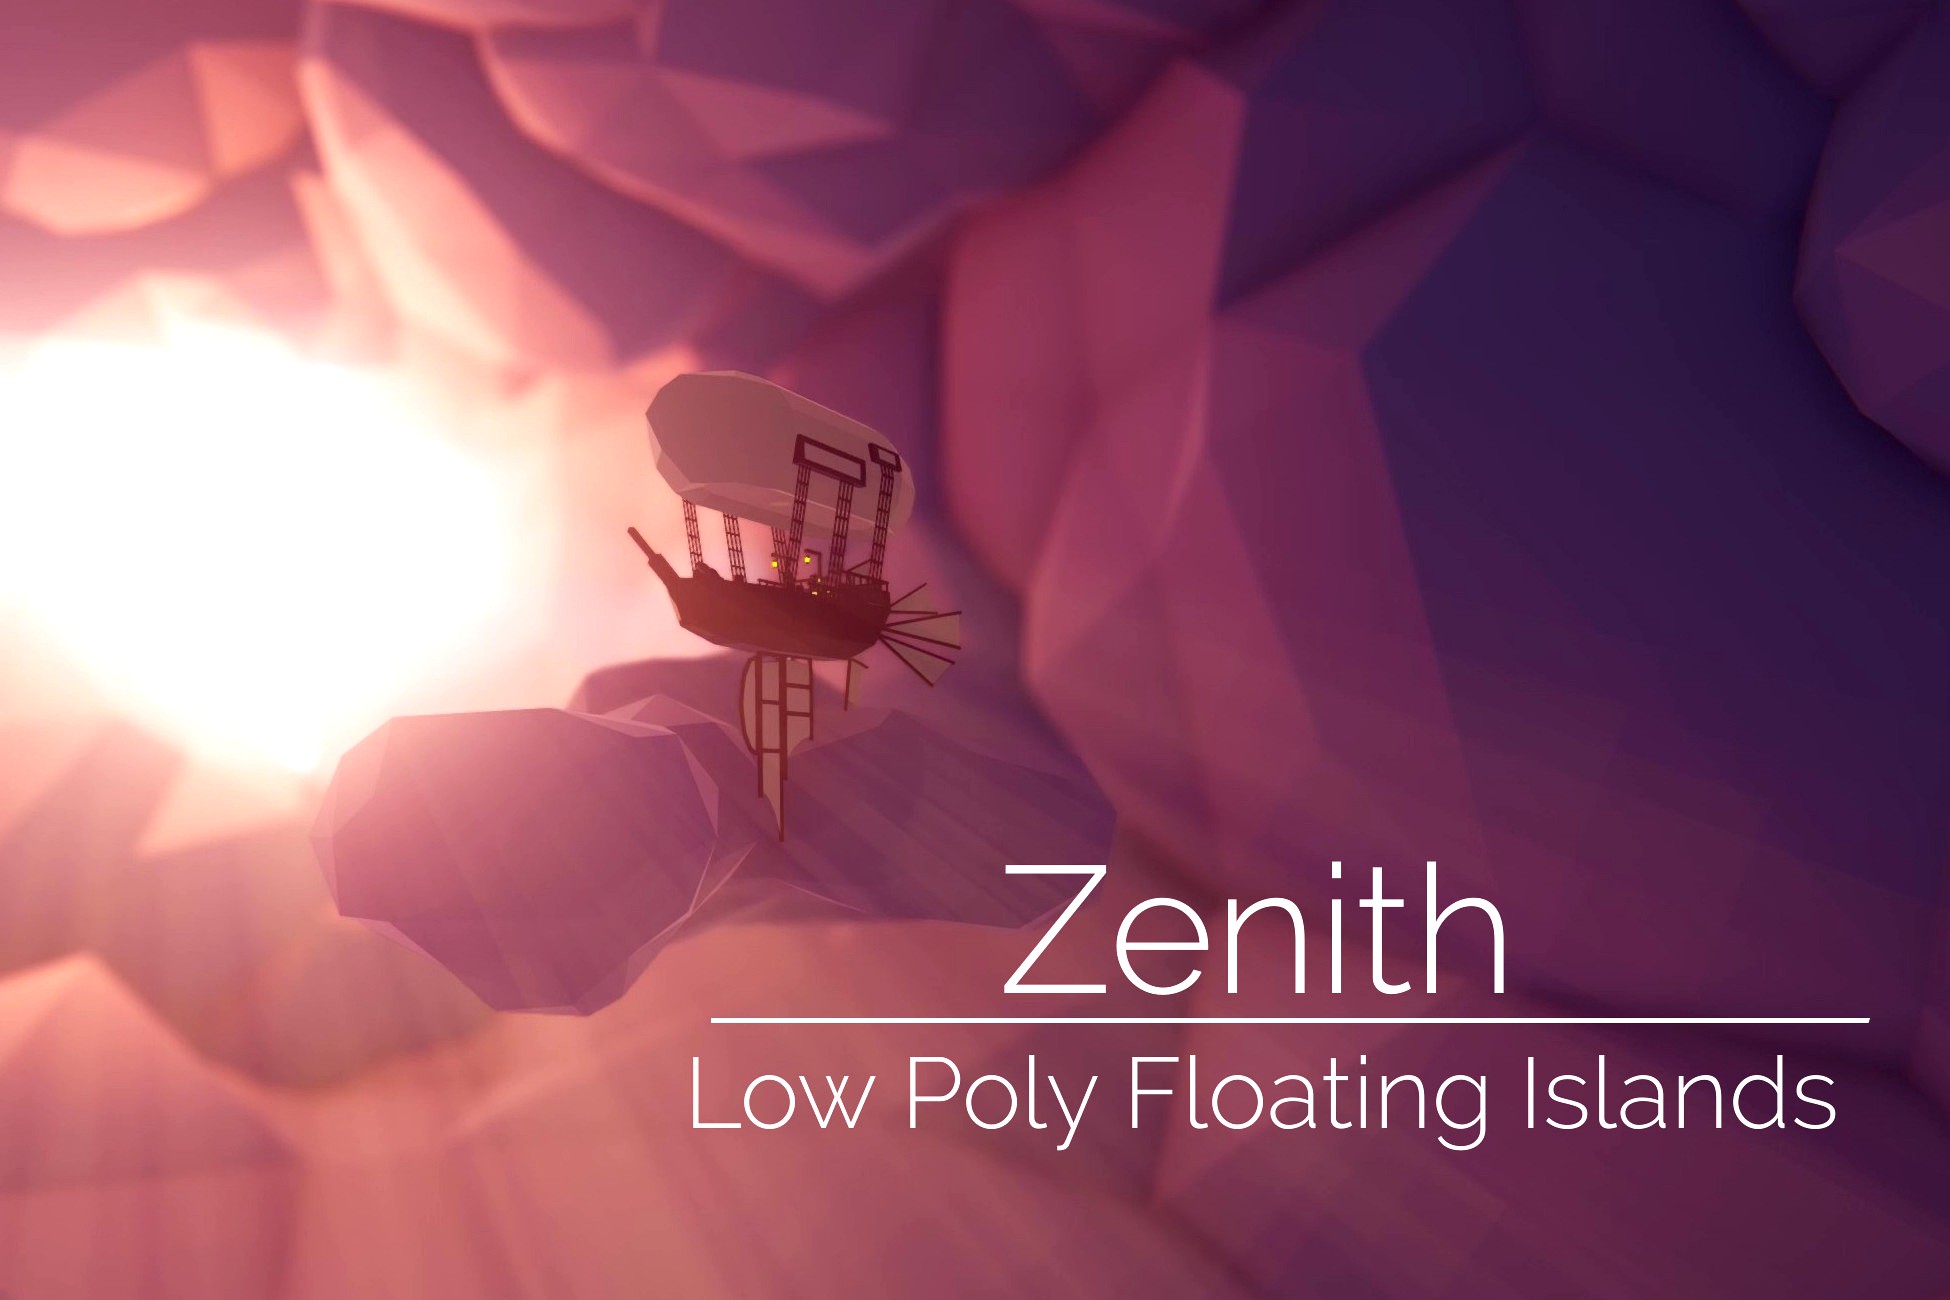 Zenith: Low Poly Floating Islands